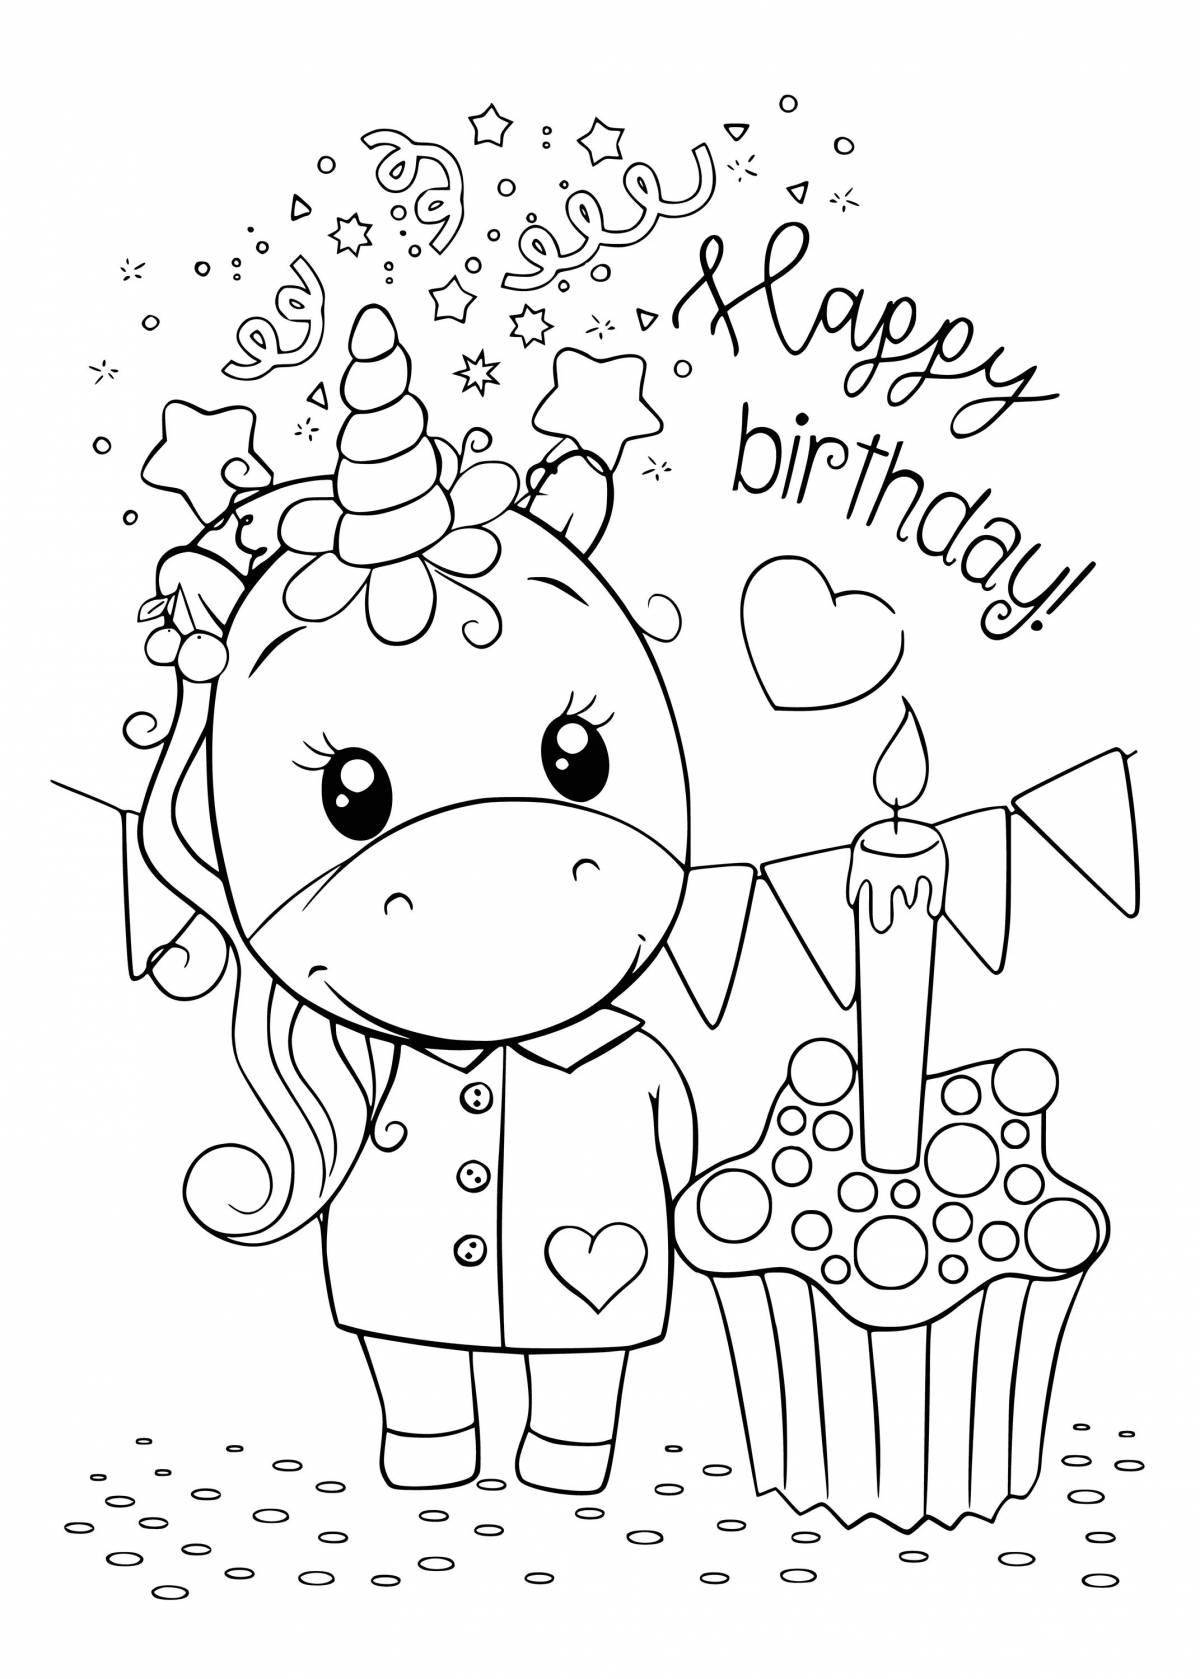 Playful greeting card coloring page